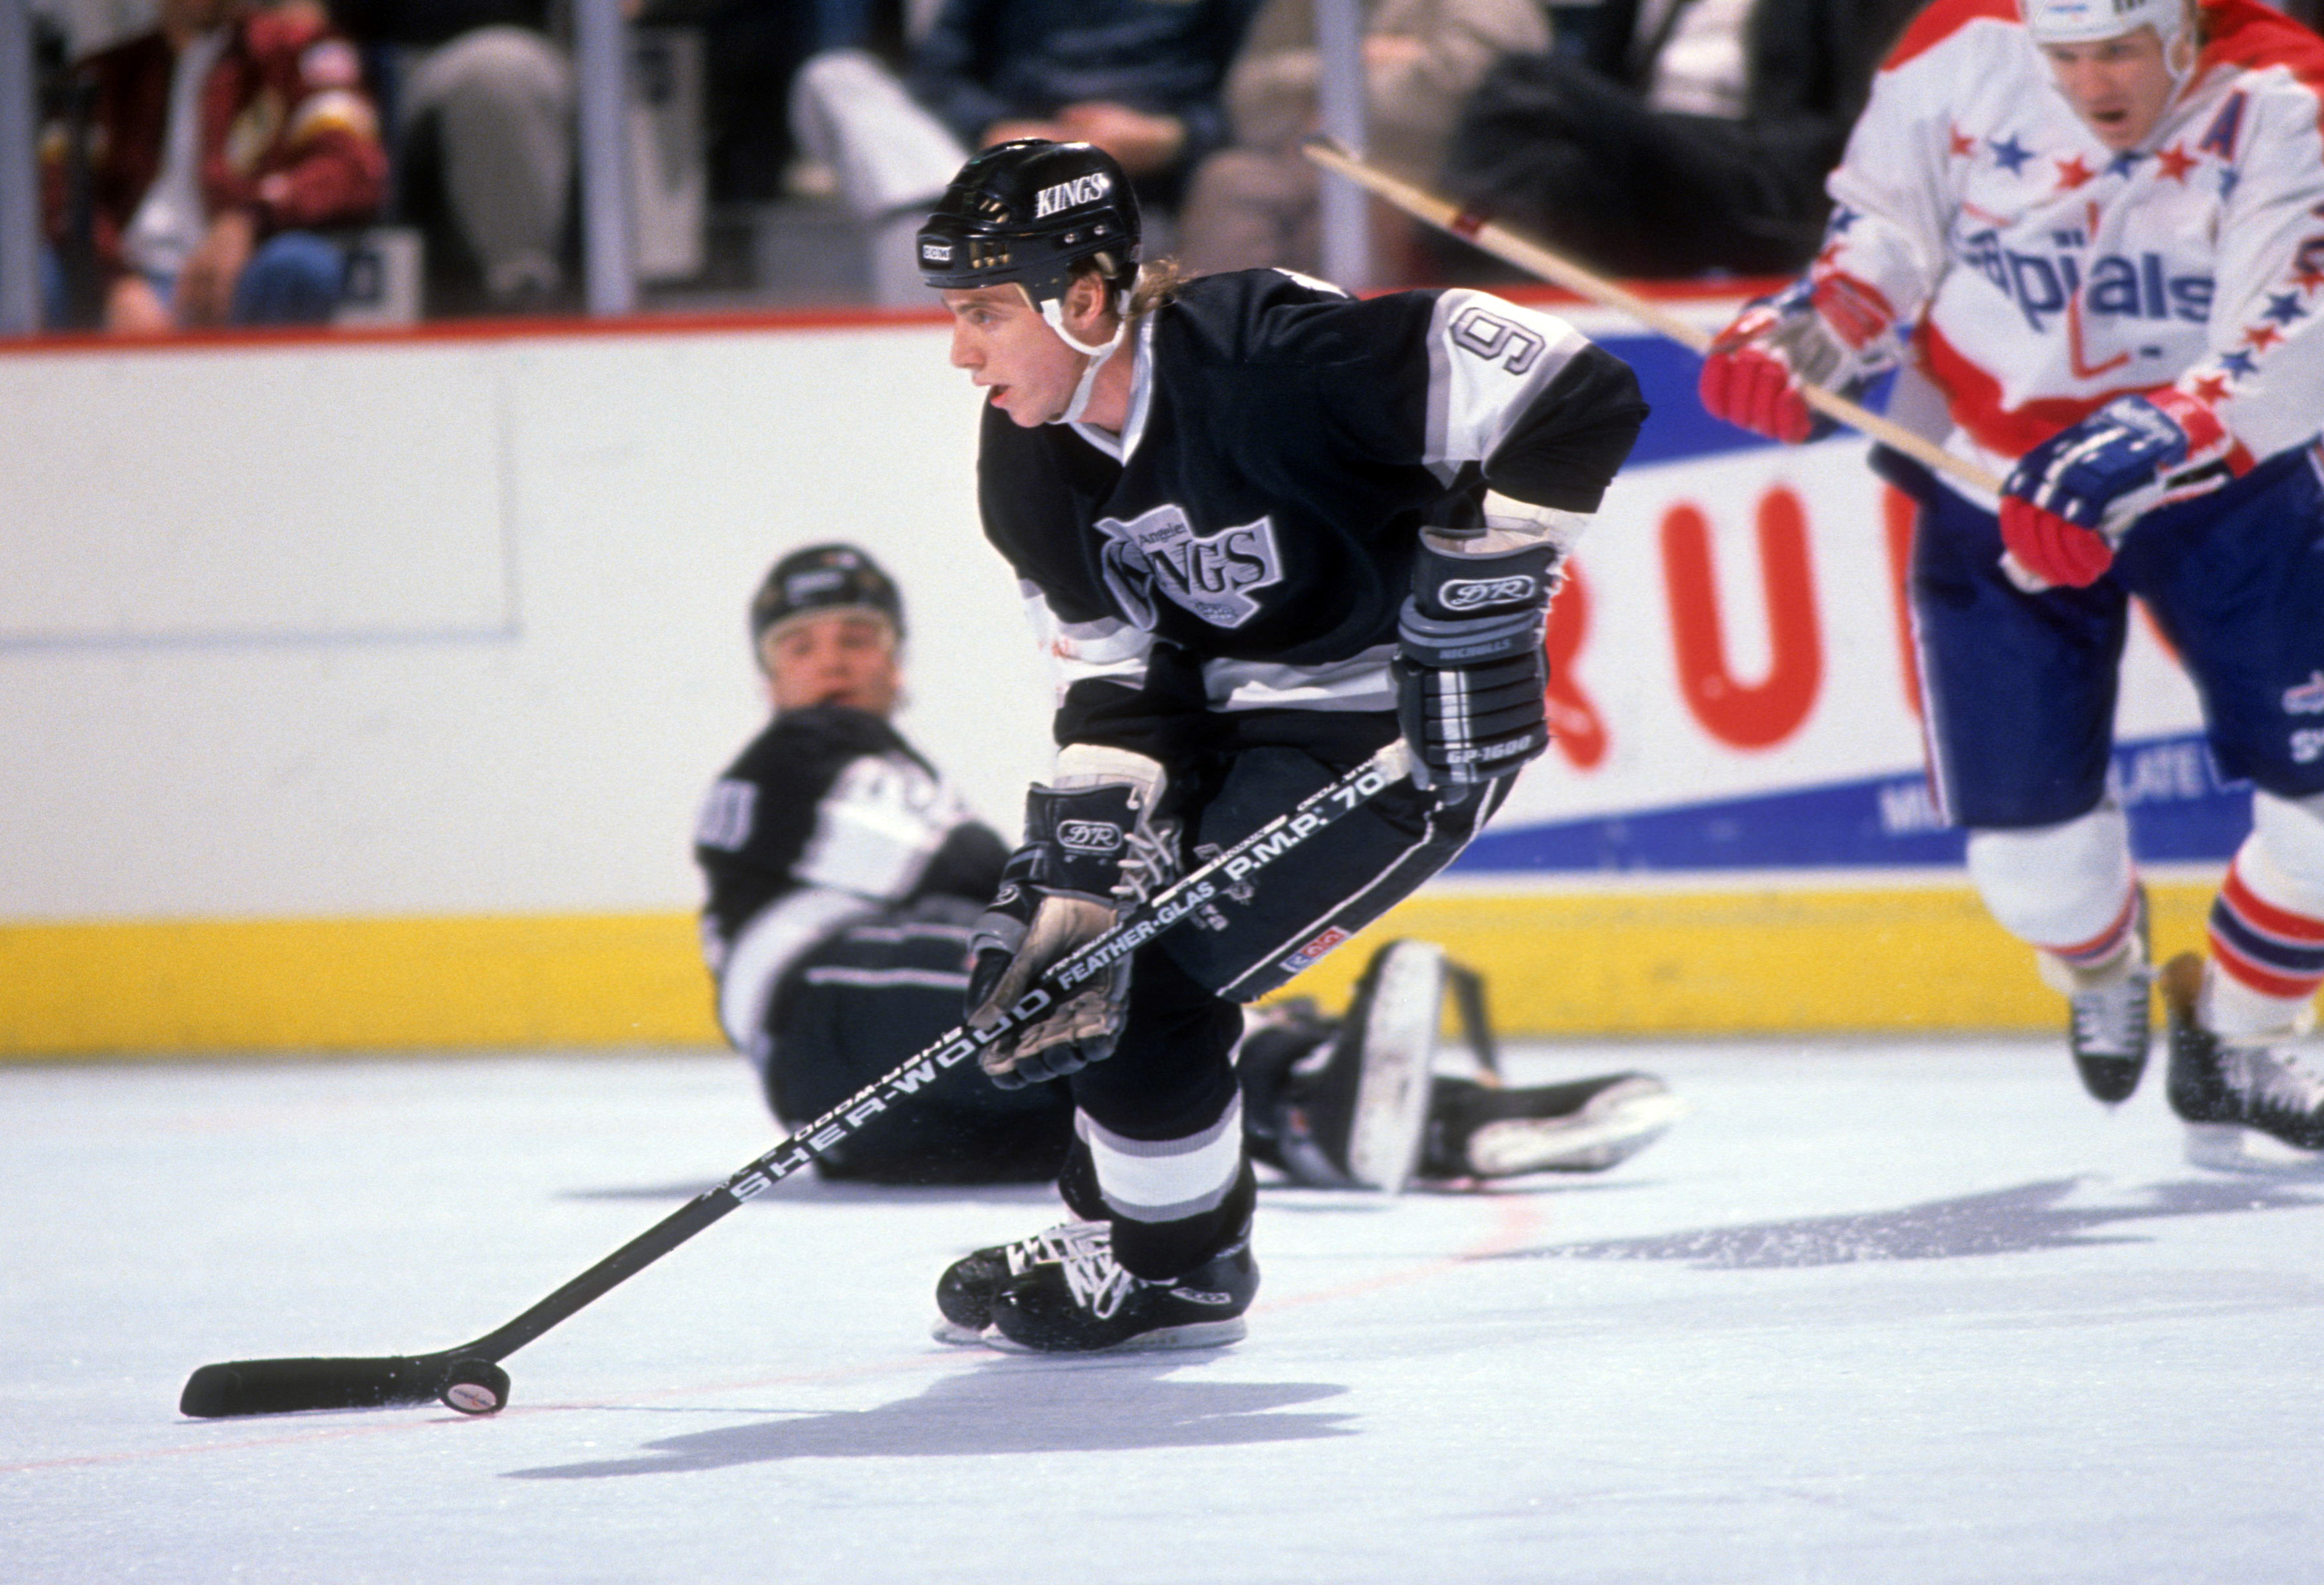 Bernie Nicholls #9 of the Los Angeles Kings skates with the puck during an NHL game against the Washington Capitals on February 10, 1989 at the Capital Centre in Landover, Maryland.